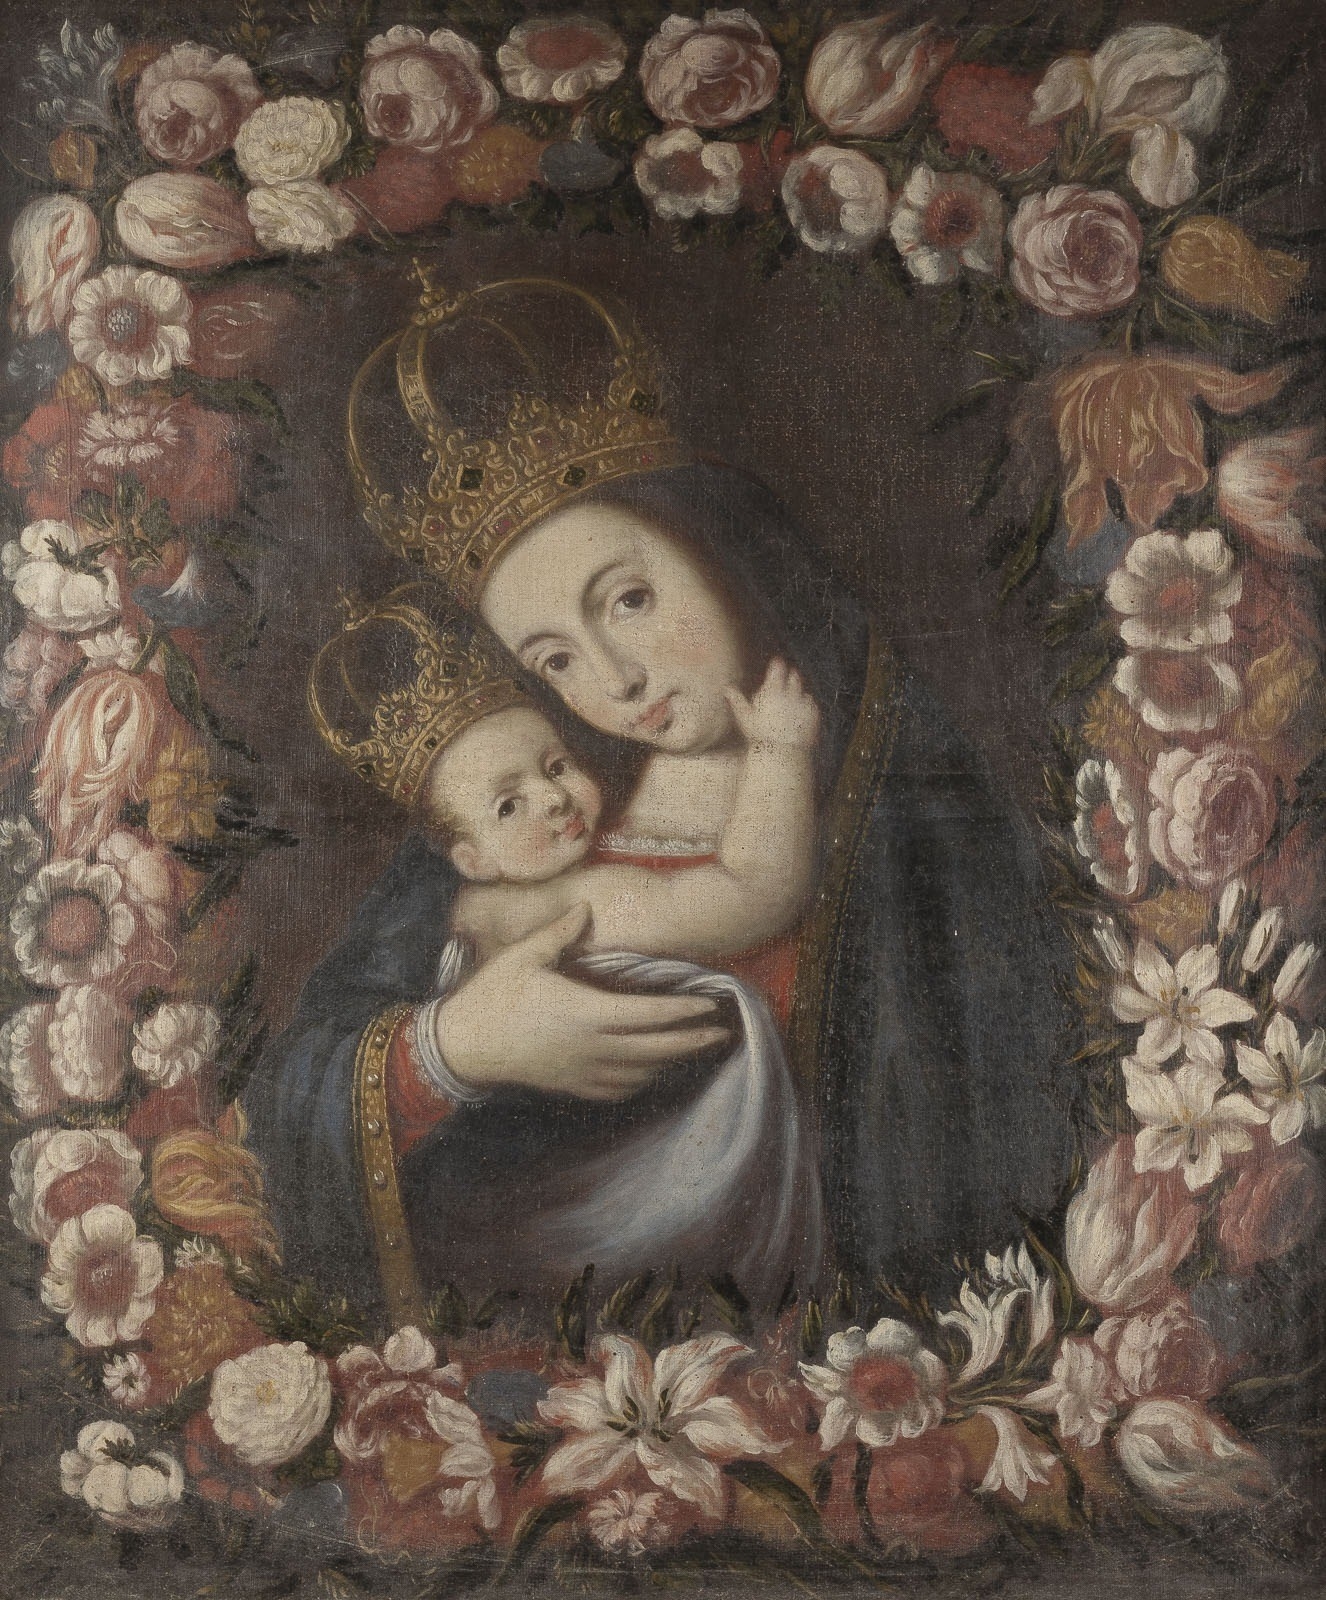 THE VIRGIN WITH THE CHILD IN A GARLAND OF FLOWERS - South American School, 18th Century